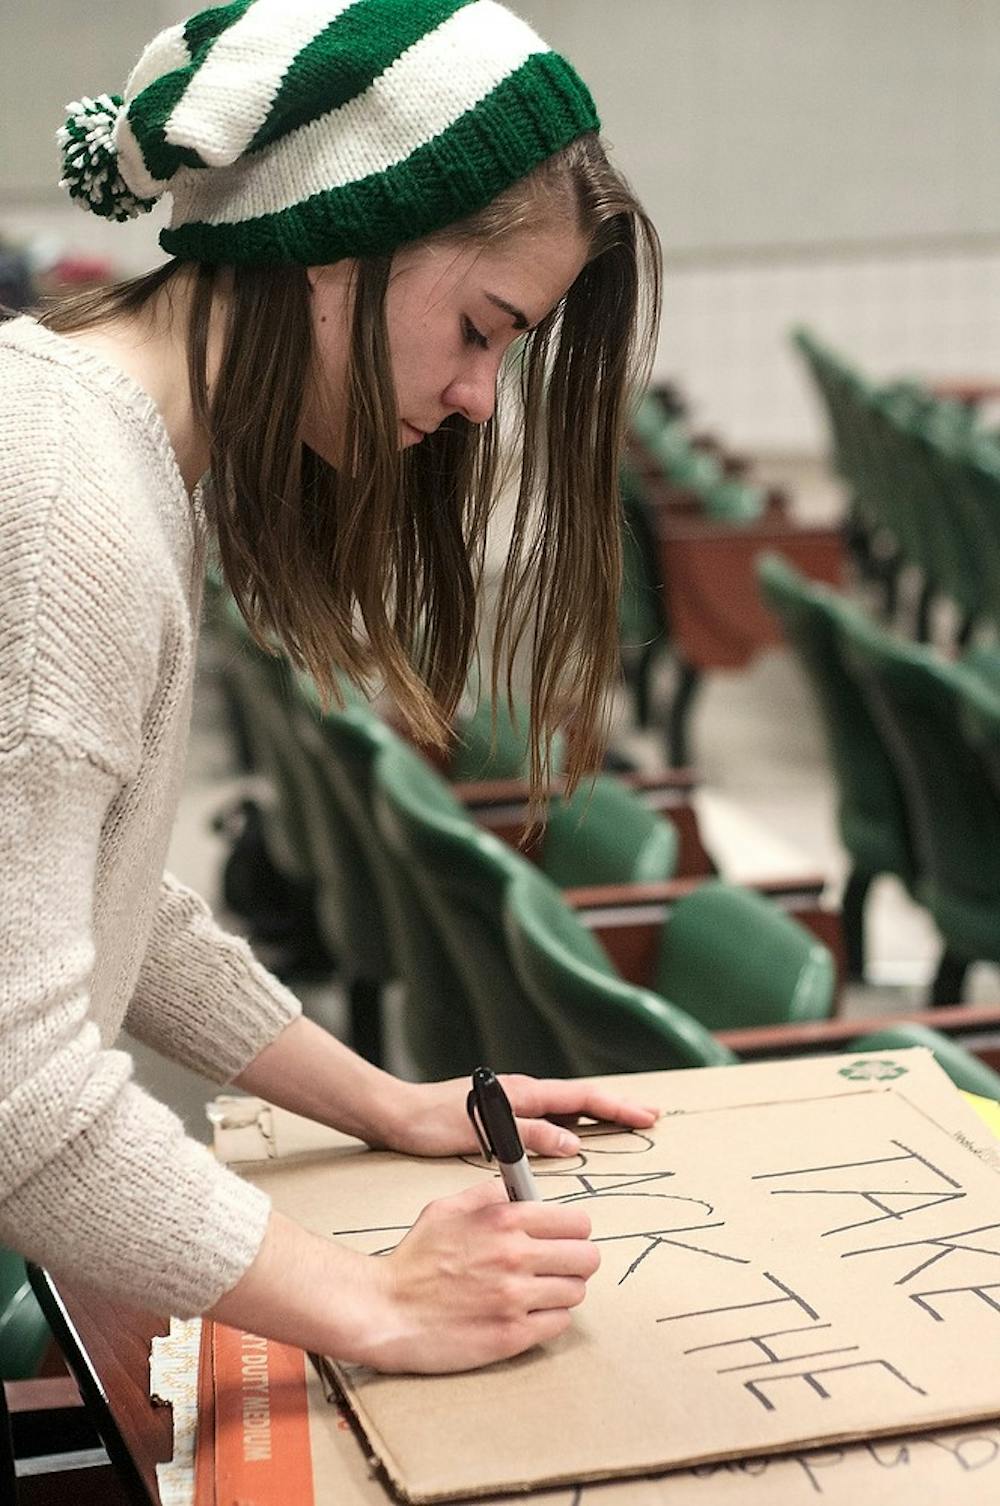 <p>James Madison freshman Casey Paskus makes a sign for Take Back the Night April 7, 2015, in B115 Wells Hall. Paskus made 16 signs with anti-sexual assault messages on them for a march to the state capital that will take place April 8. Allyson Telgenhof/The State News.</p>